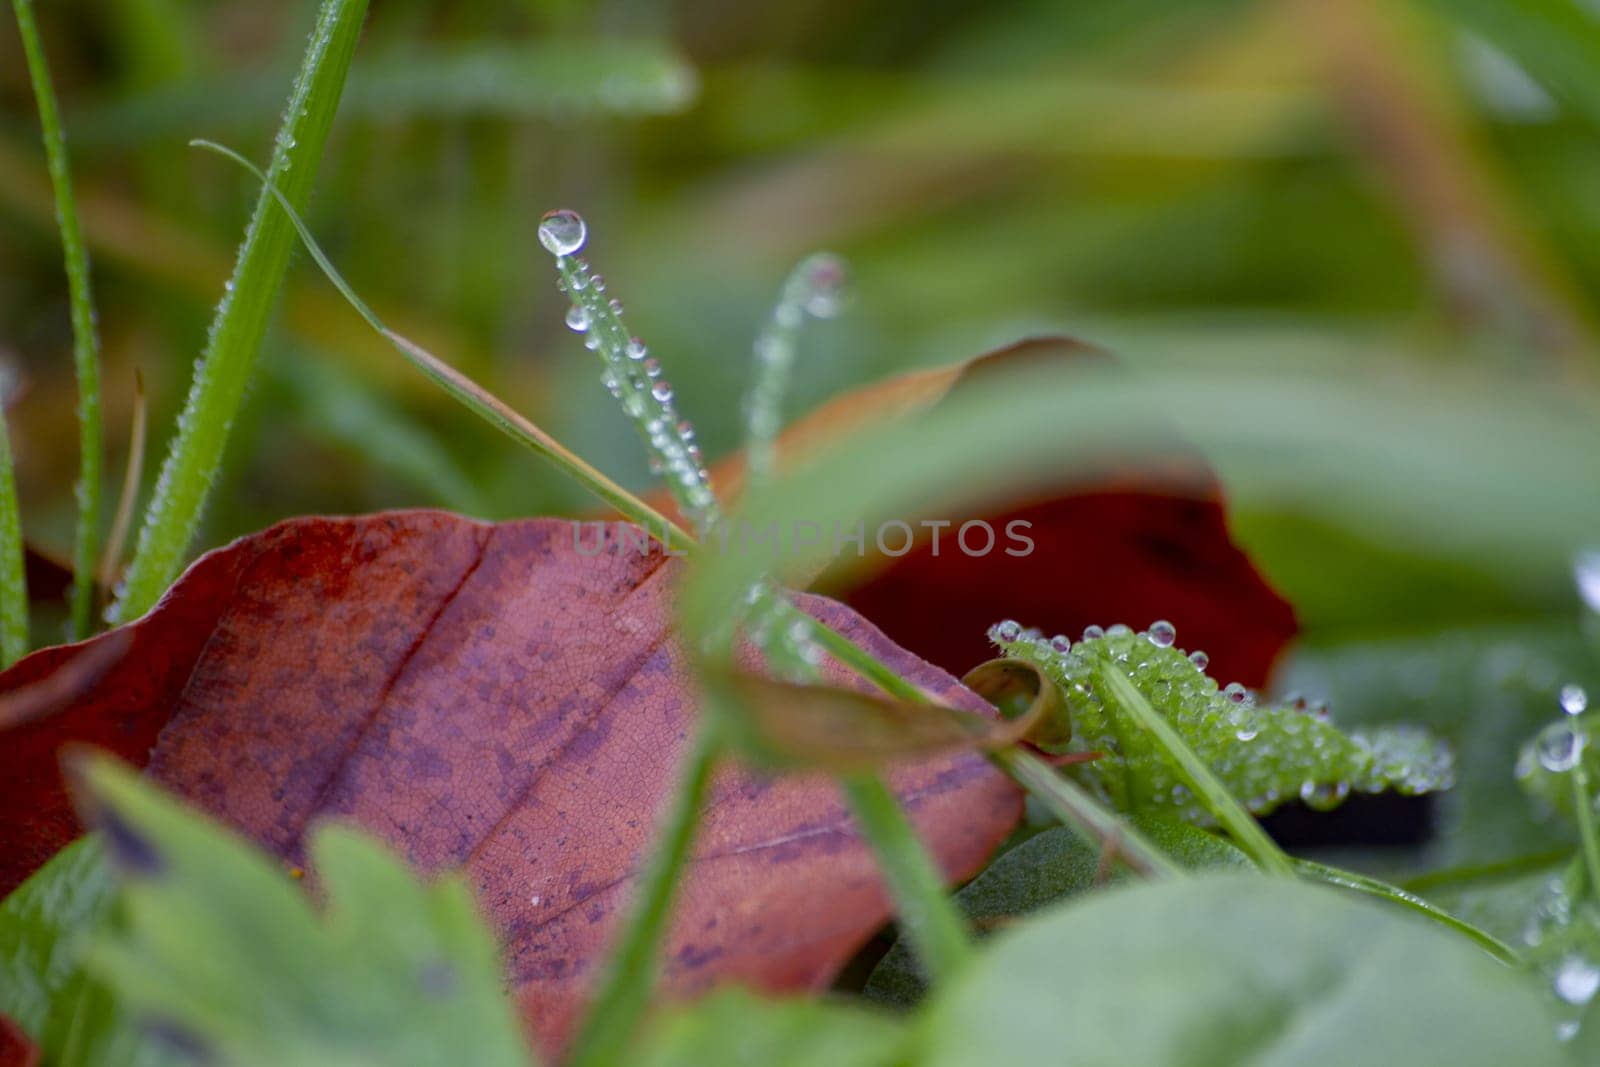 Dew drops on green grass. High quality photo